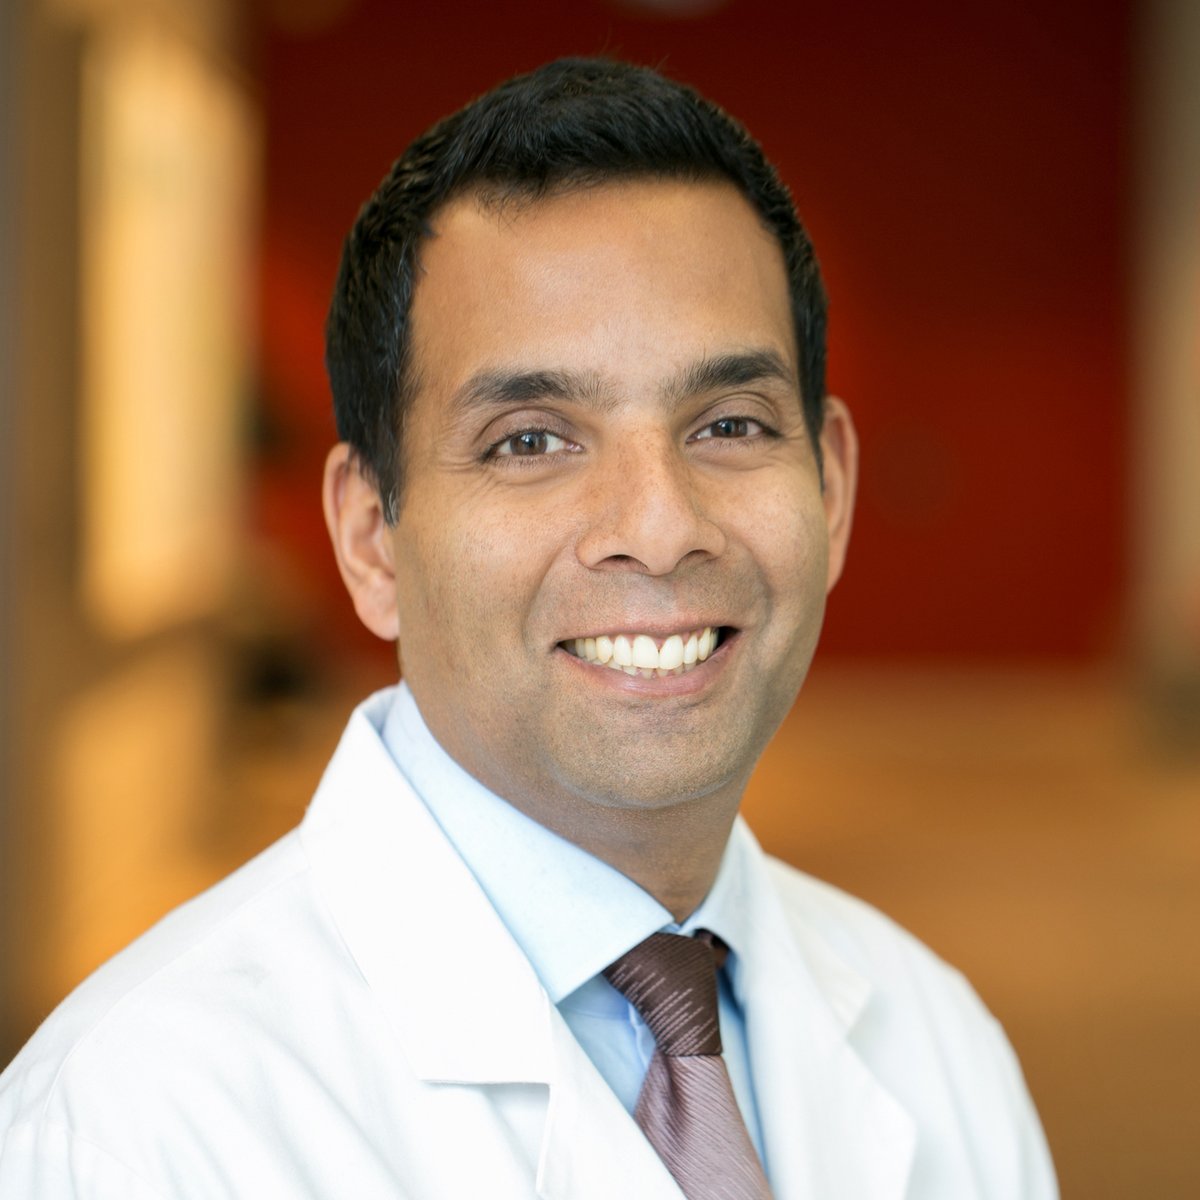 Congratulations to @DrSamirSinha on being awarded the Canadian Geriatrics Society B. Lynn Beattie Clinical Leadership Award which recognizes him as a member of @CanGeriSoc who has made a significant and enduring contribution to Clinical Leadership in Geriatrics.🏆